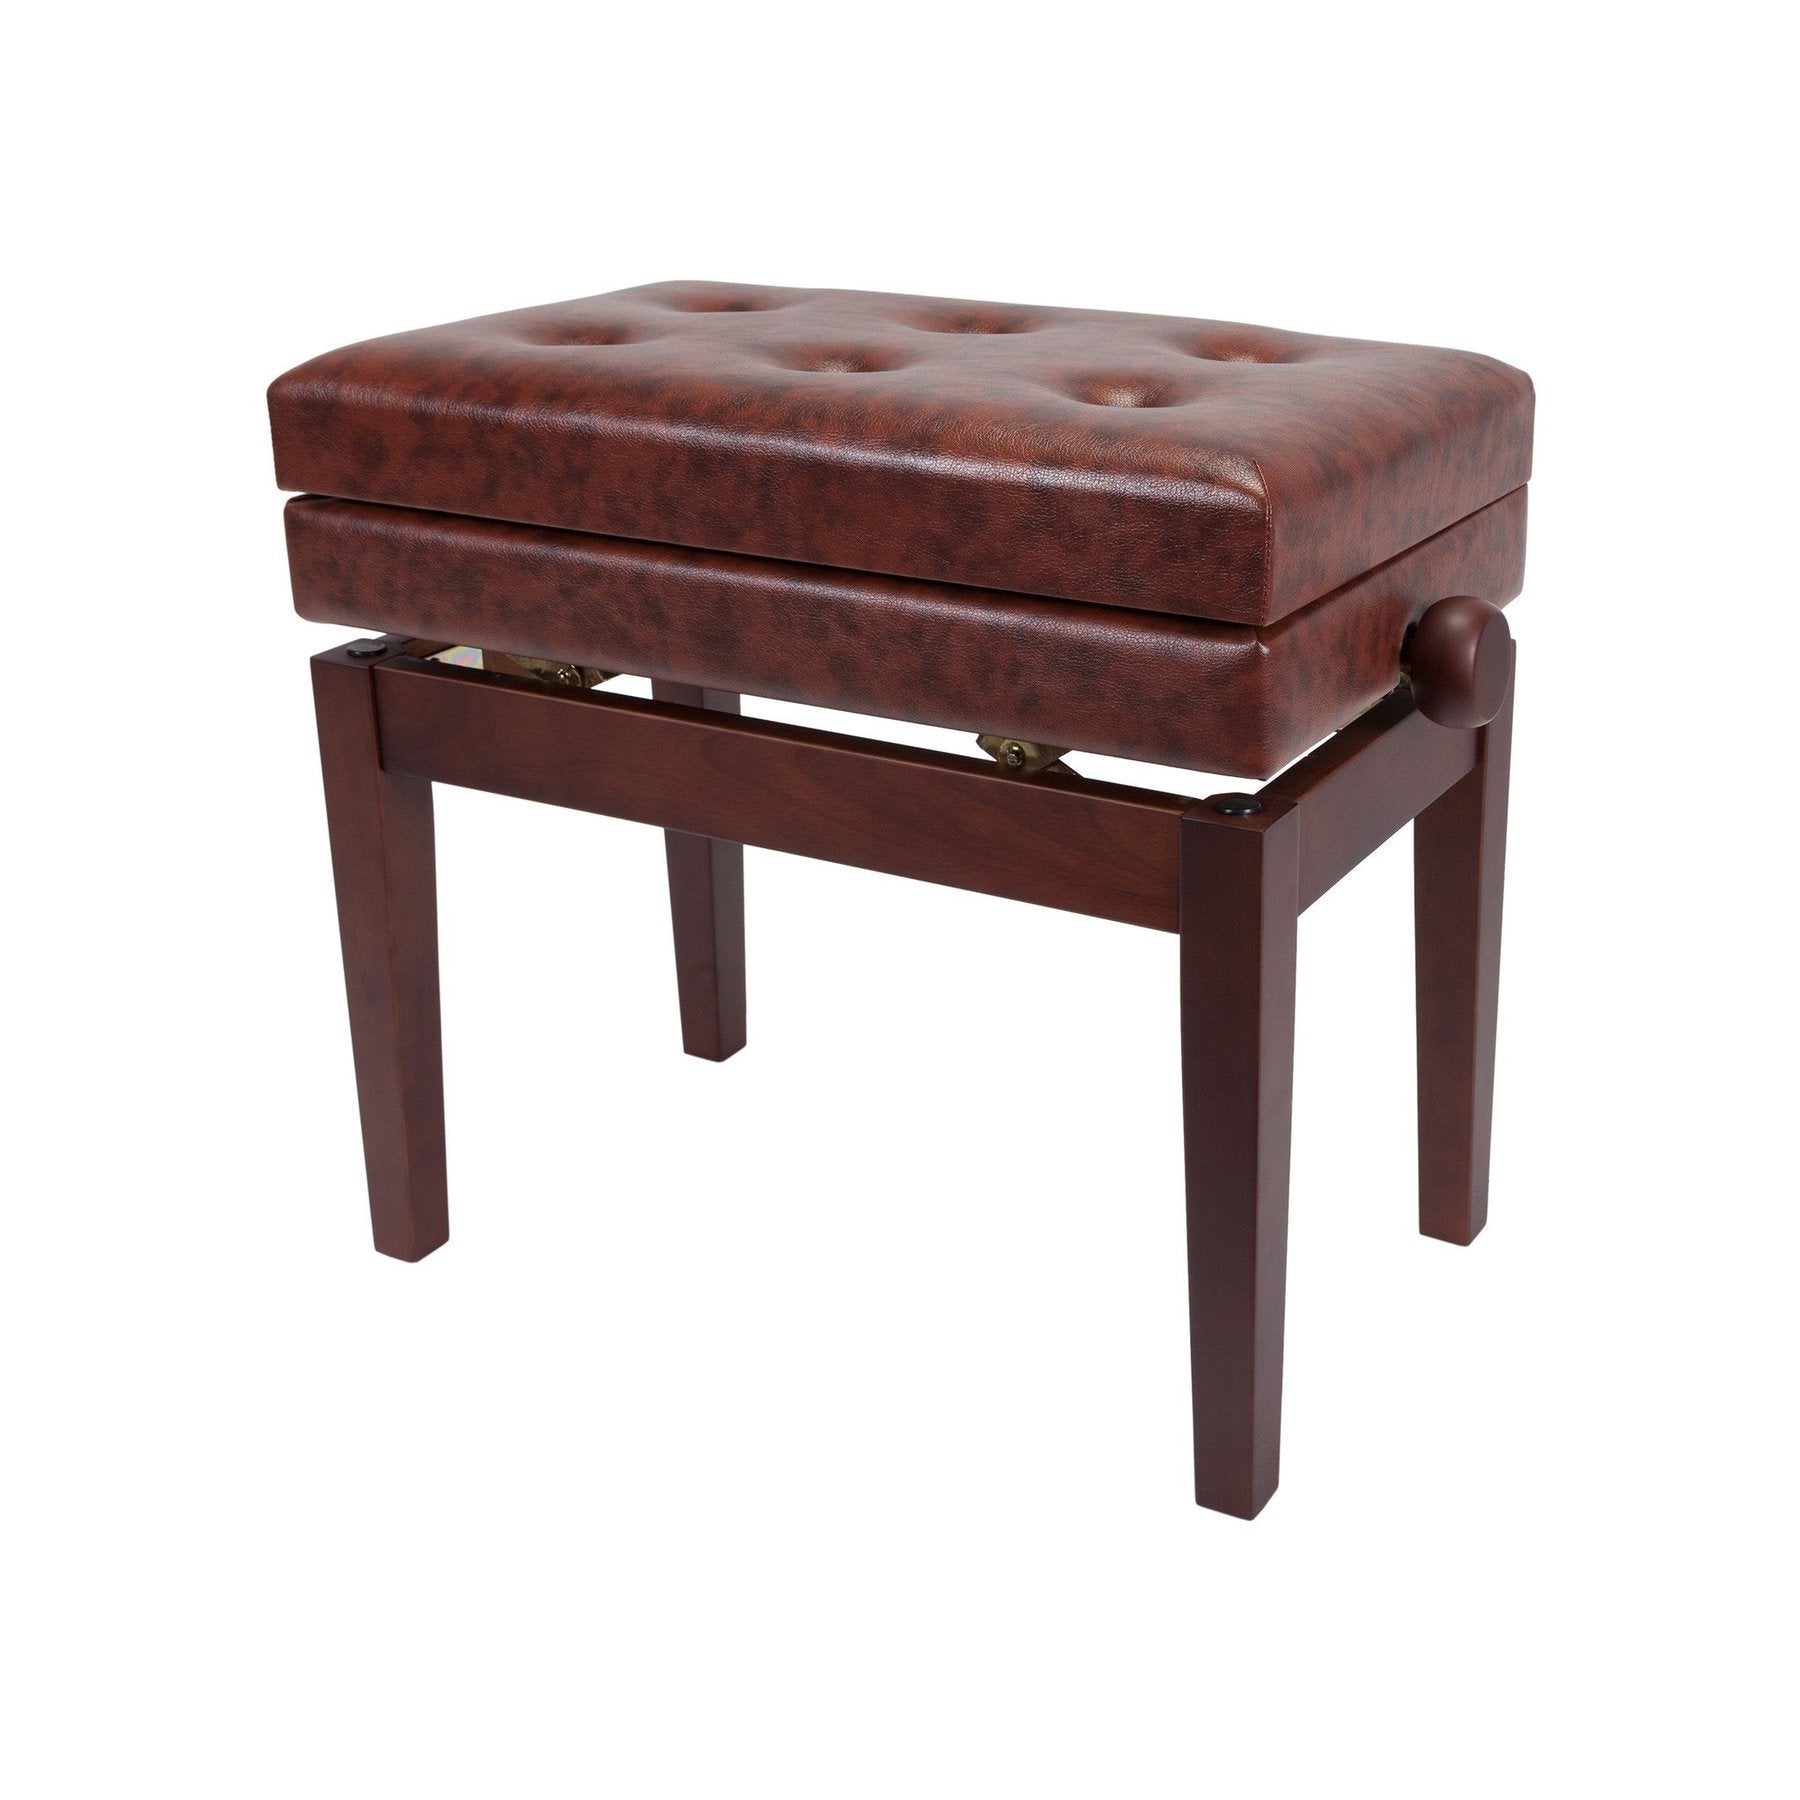 Crown Deluxe Tufted Height Adjustable Piano Stool with Storage Compartment (Walnut)-CPS-6AS-WAL